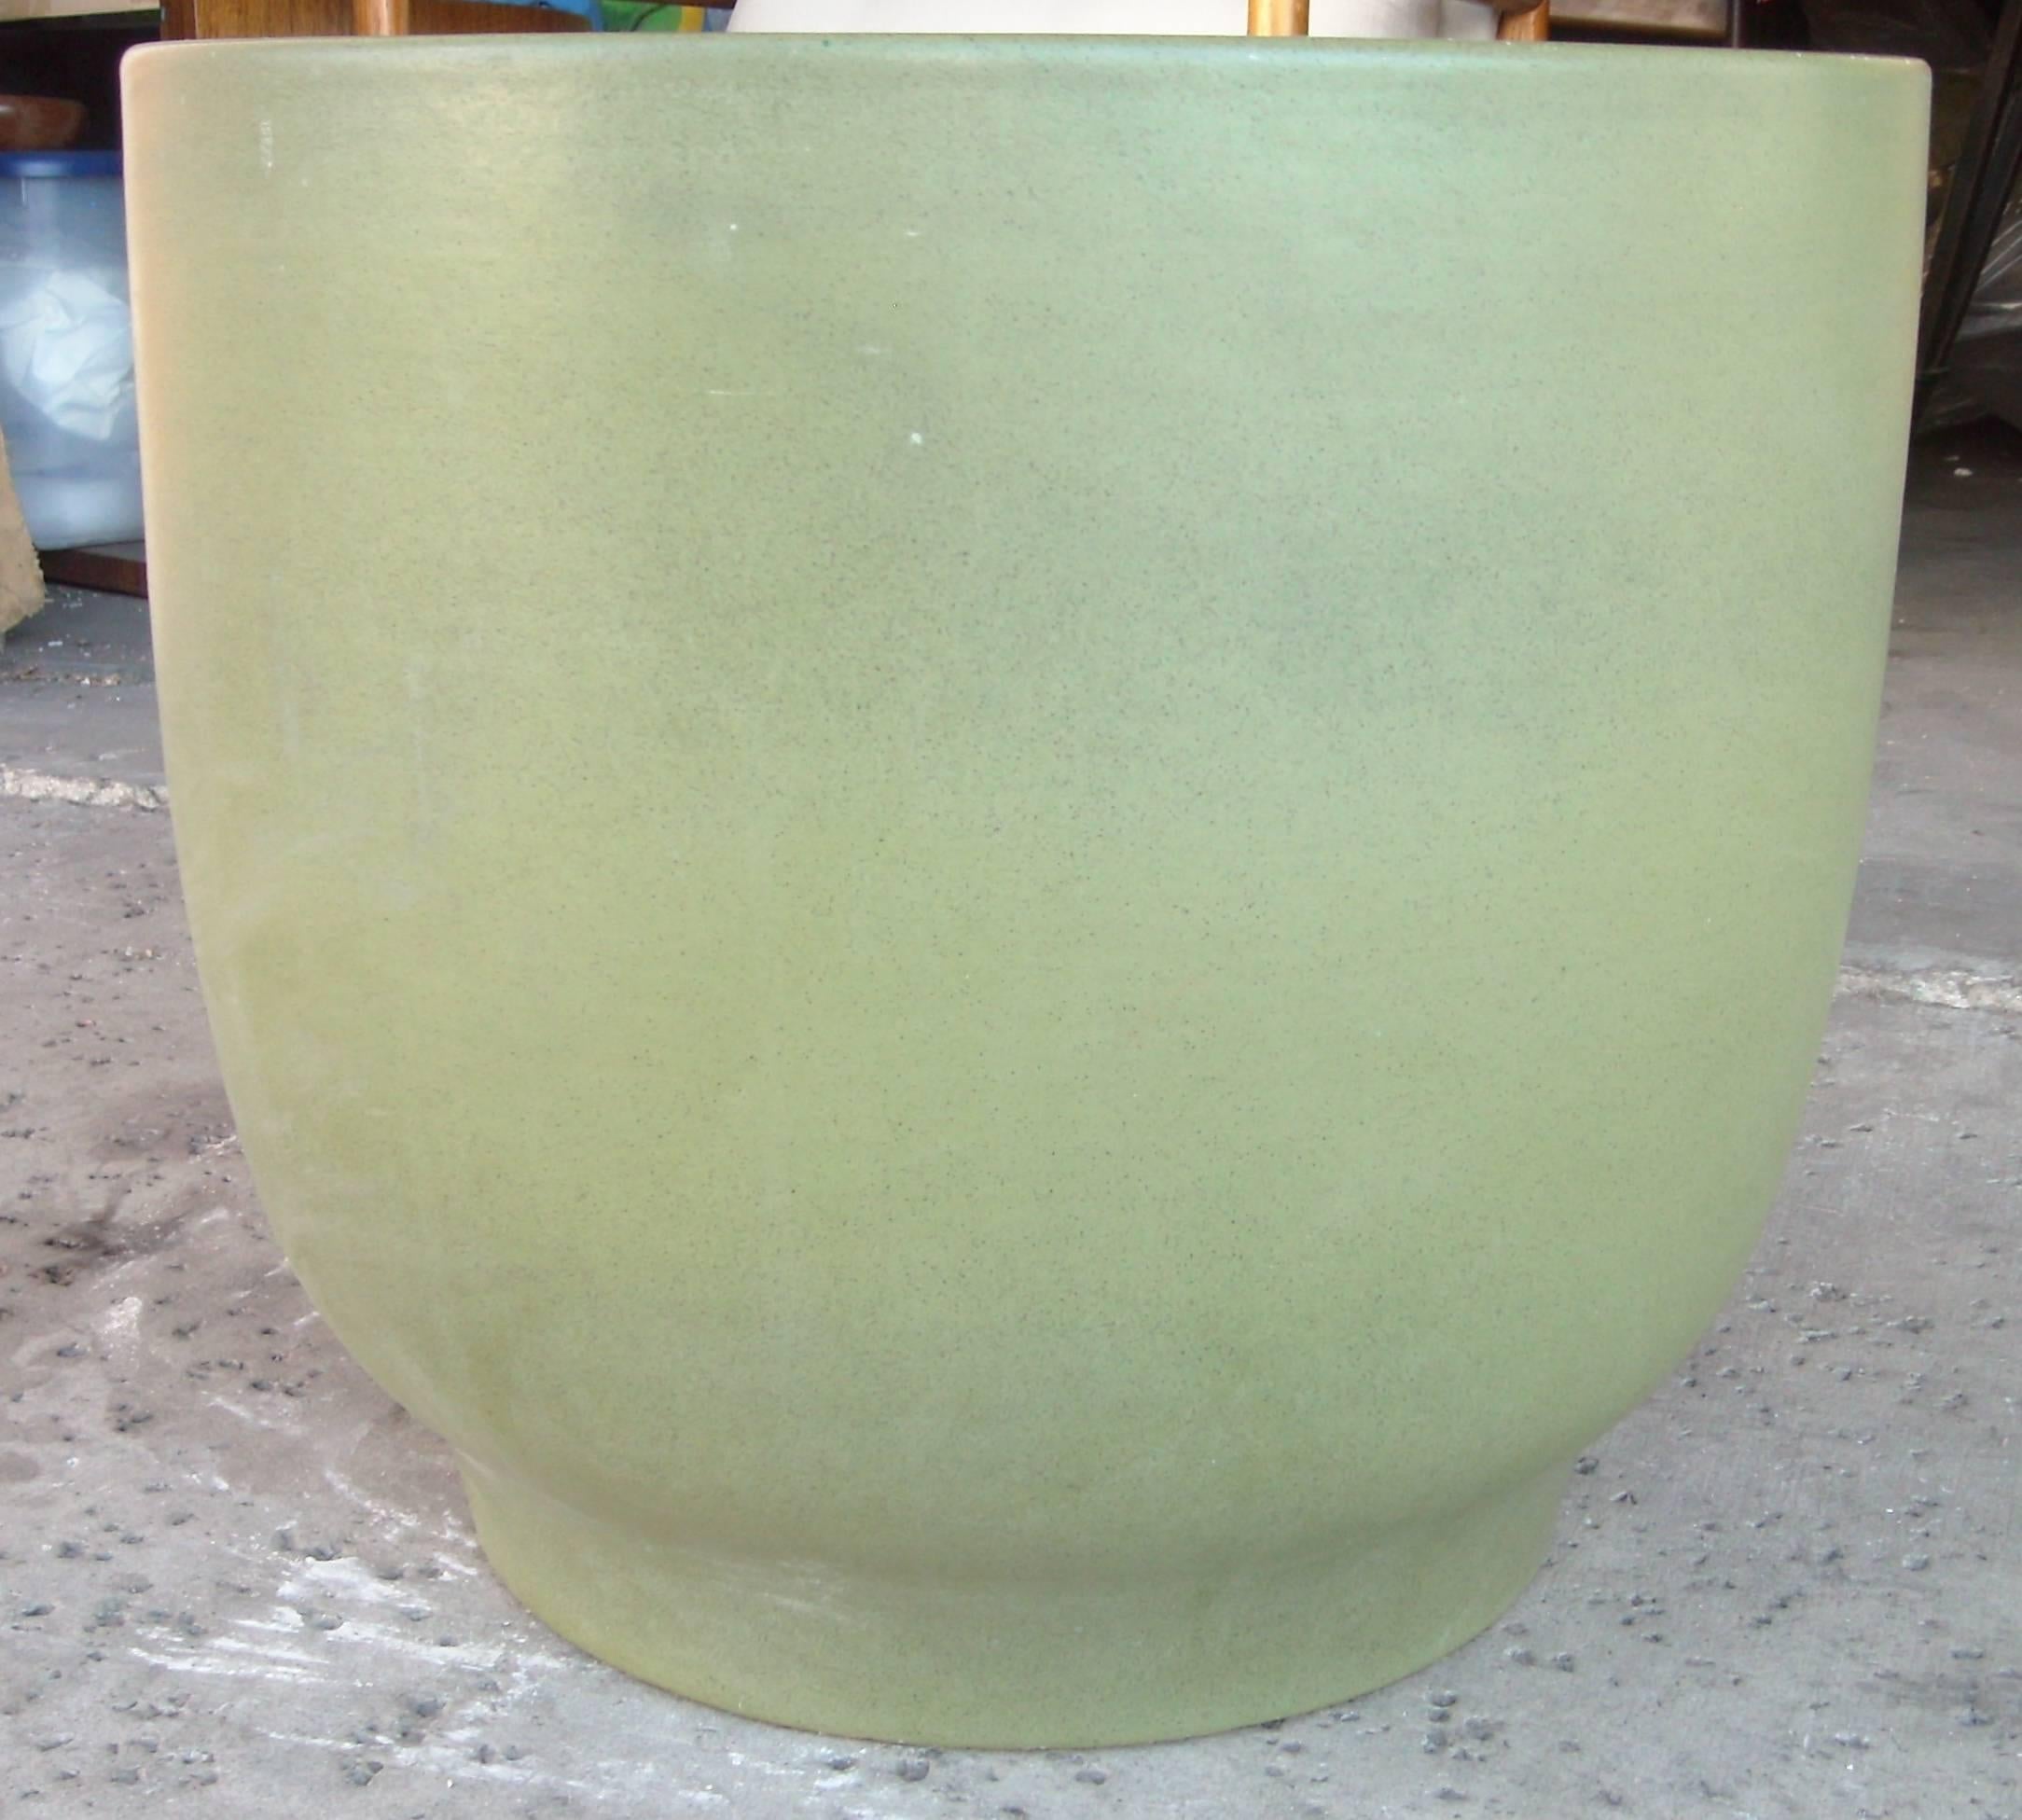 American Gainey Large Planter, Ceramic/Pottery, Marked, Olive Green